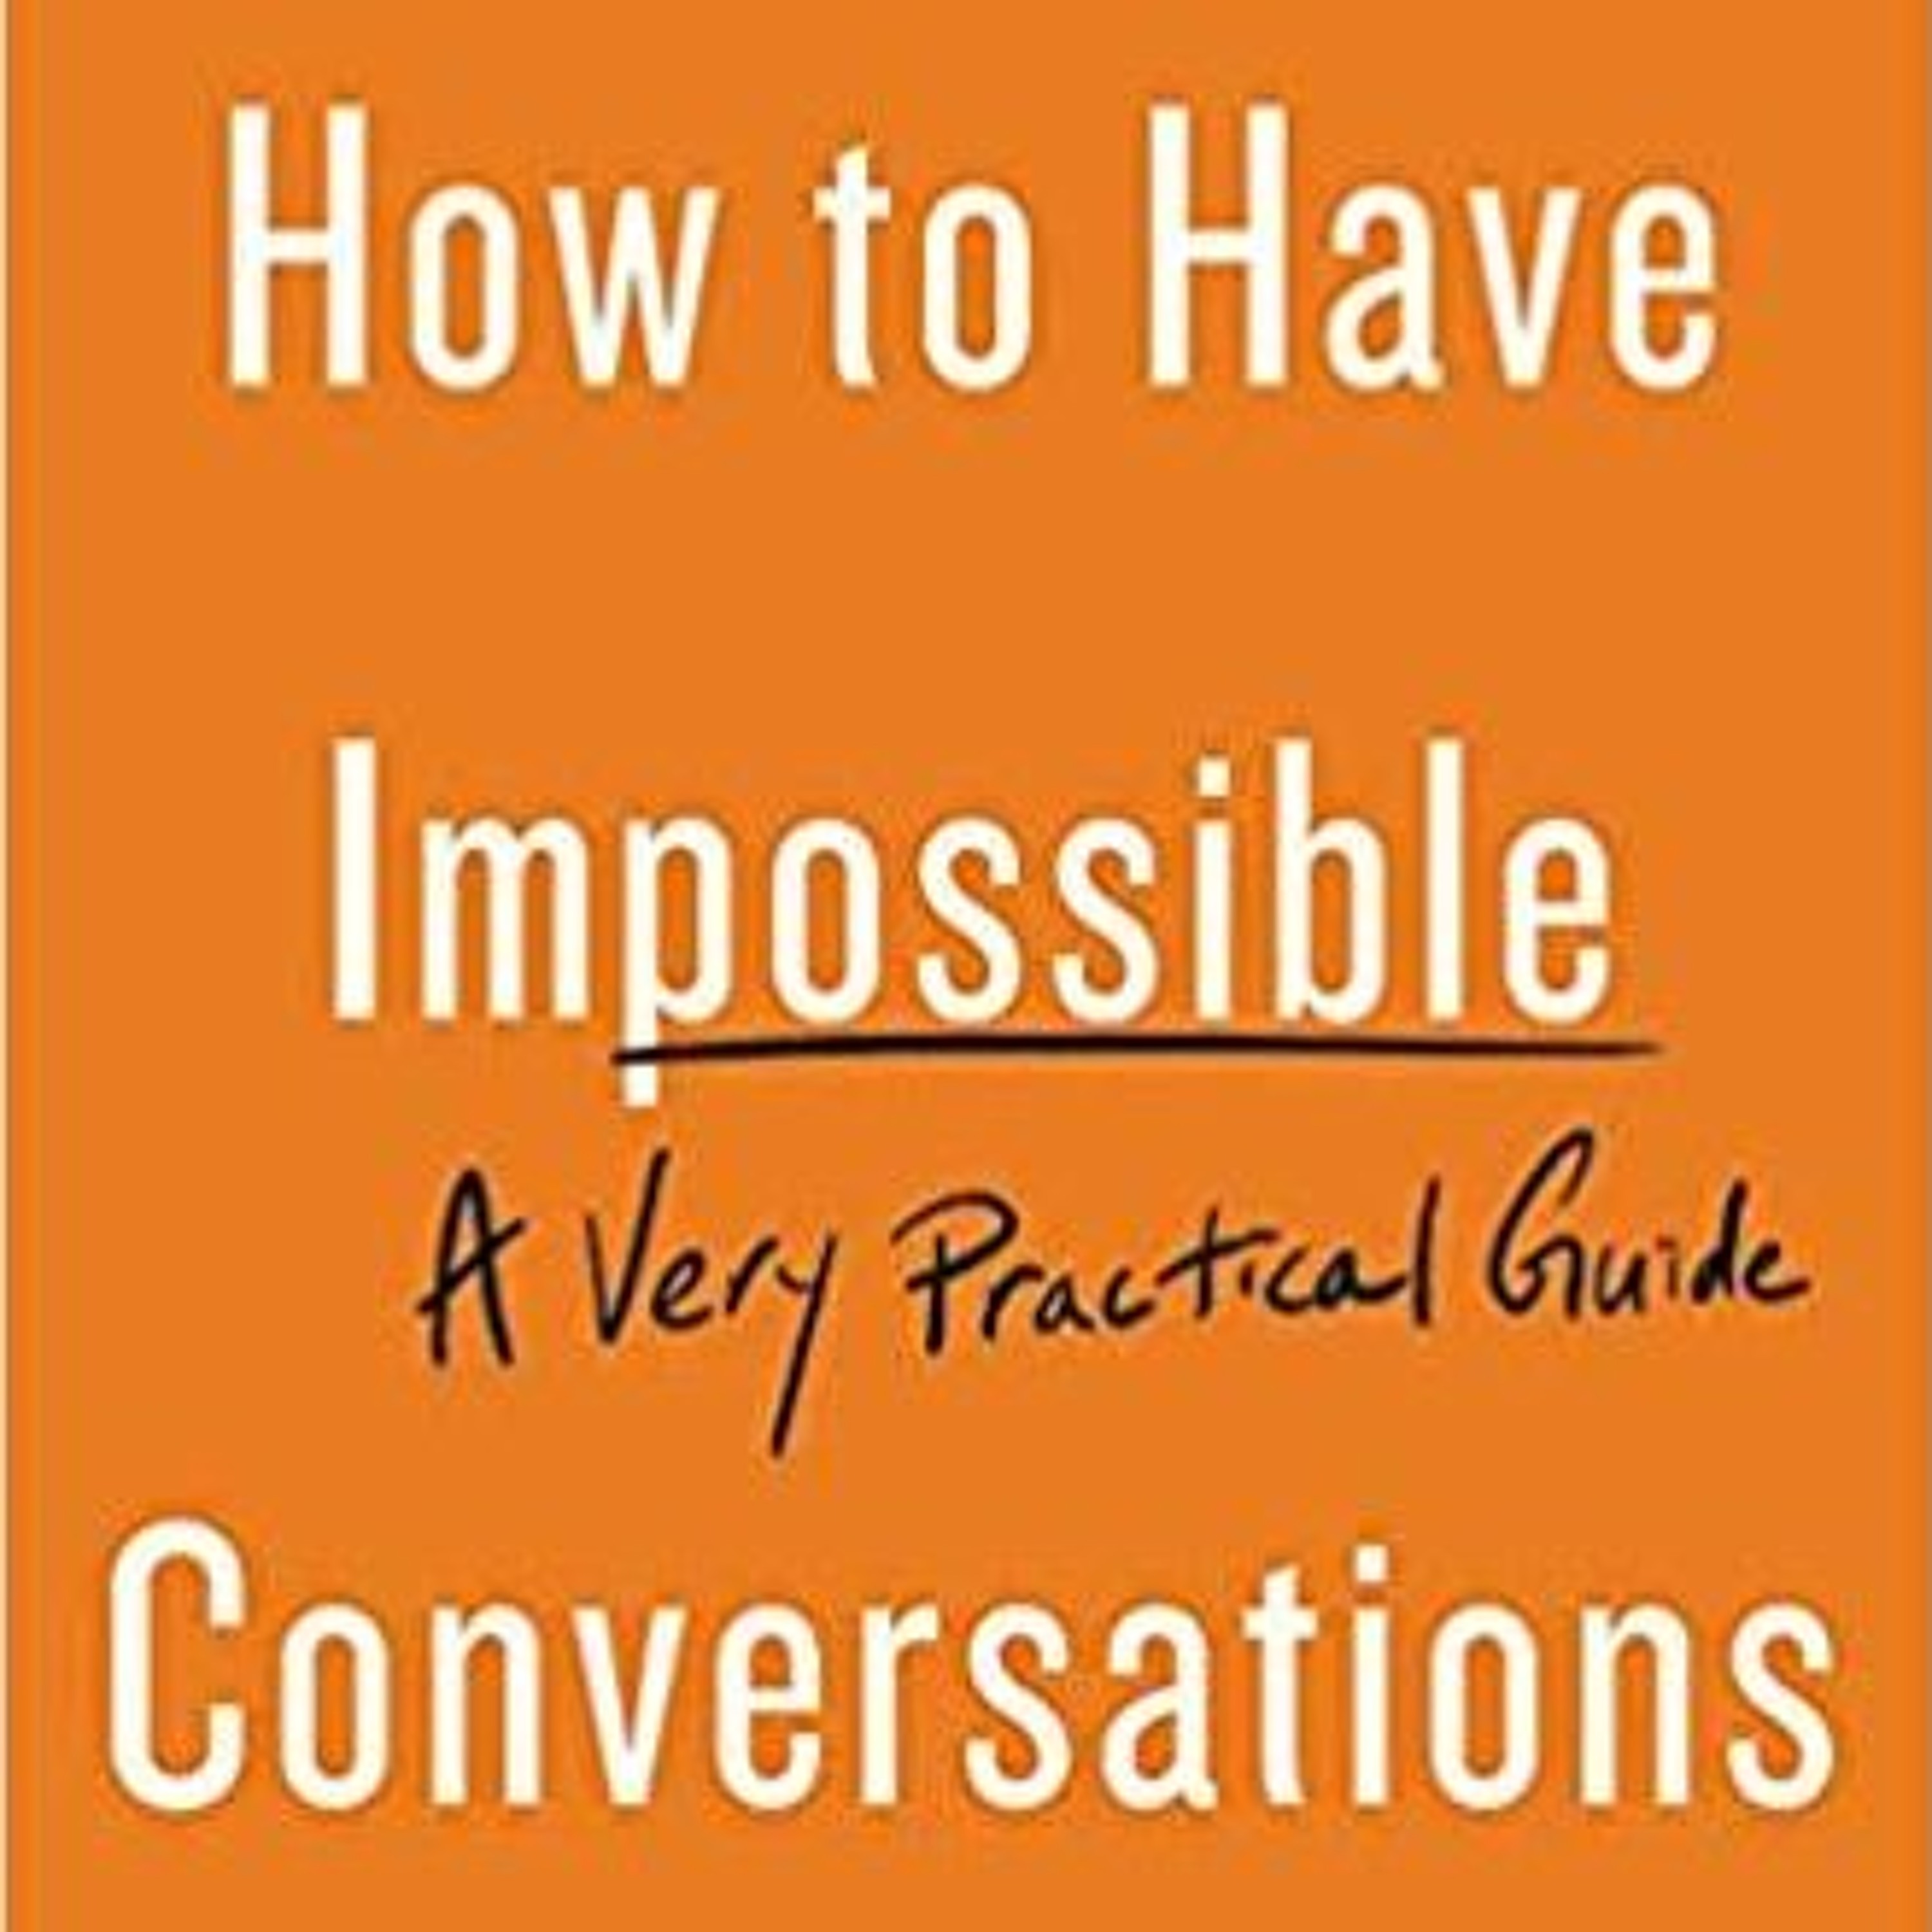 89: How To Have Impossible Conversations With Peter Boghossian